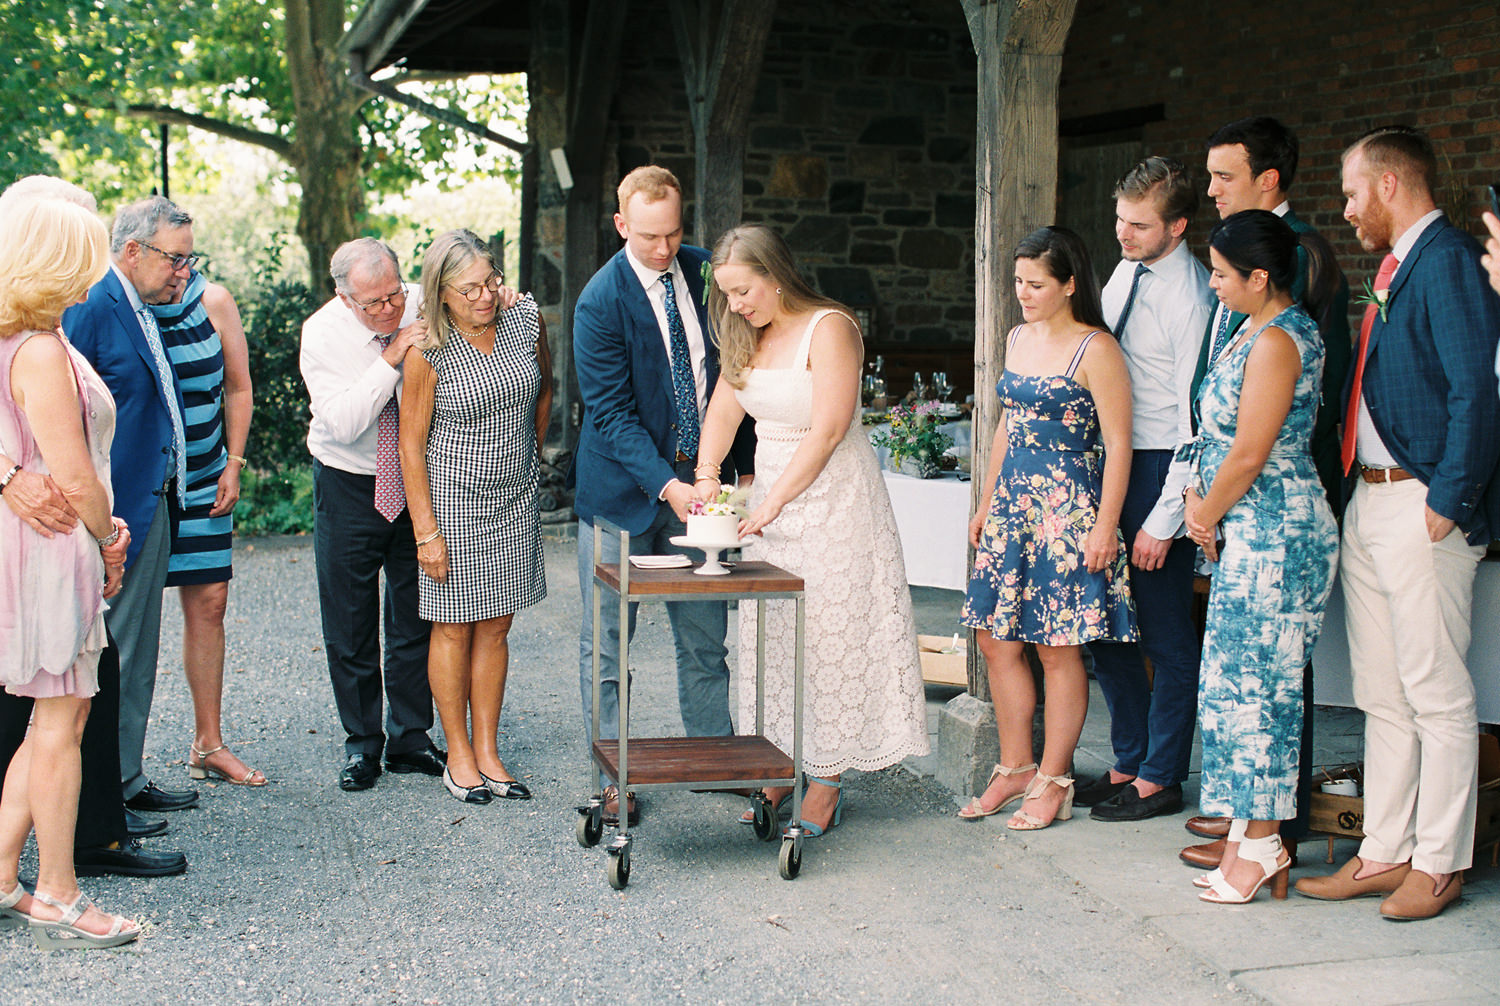 Family looks on as bride and groom cut wedding cake during an intimate picnic wedding | photographed by Mary Dougherty 